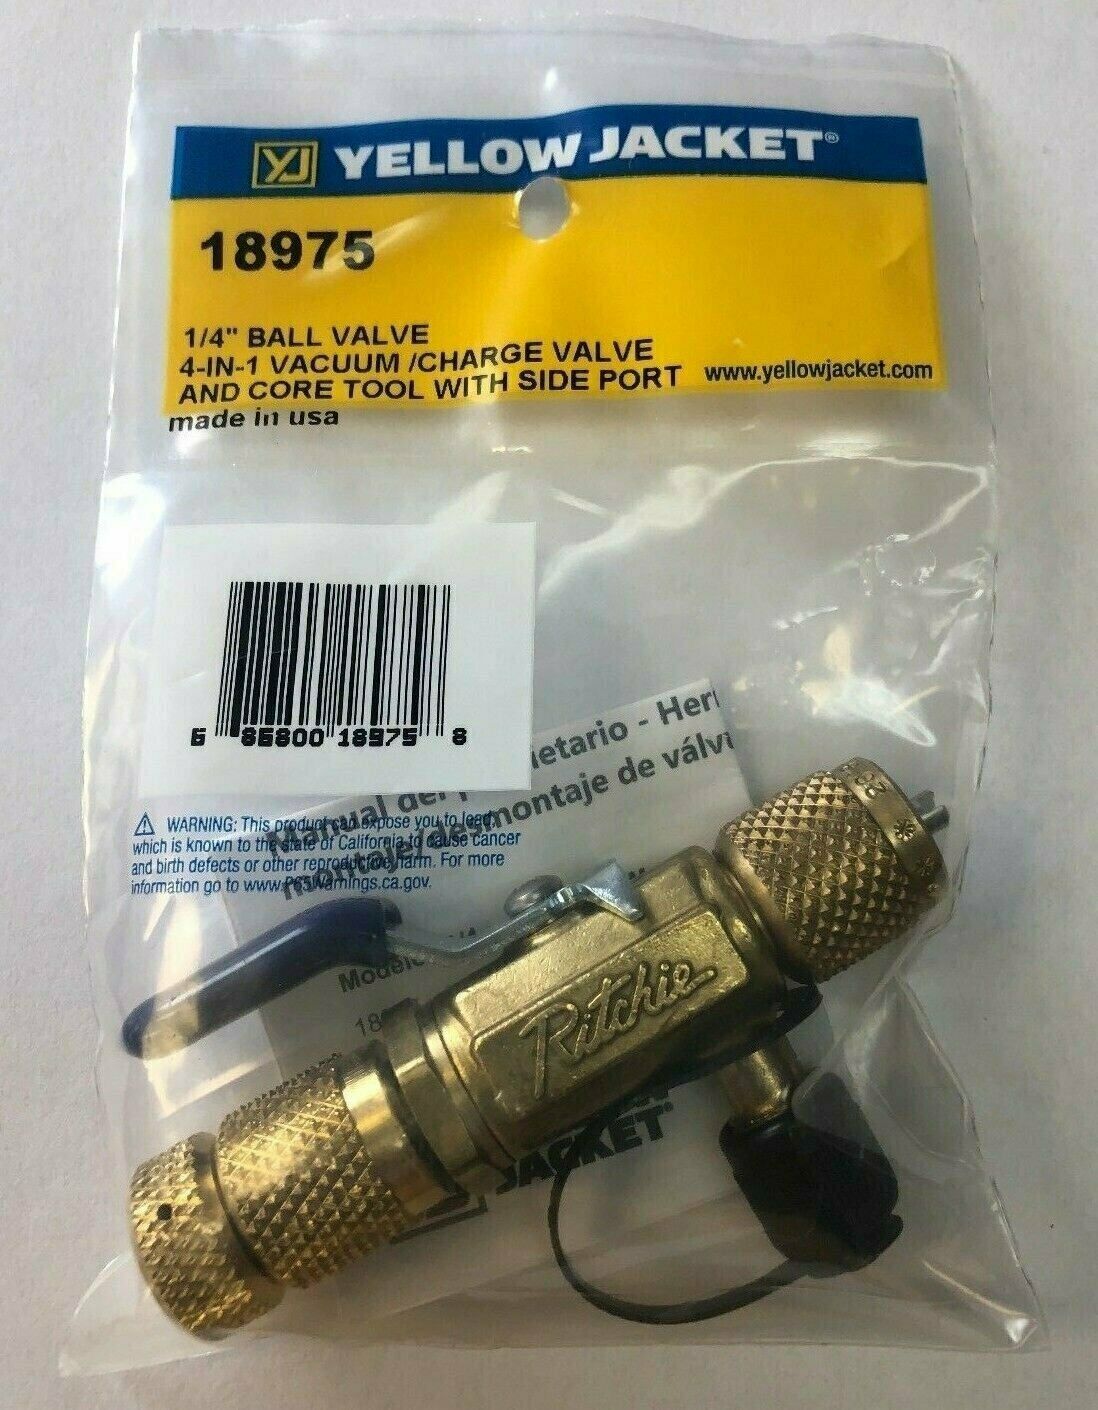 Yellow Jacket 18975 – 4 in 1 Ball Valve Tool, 1/4” with Side Port